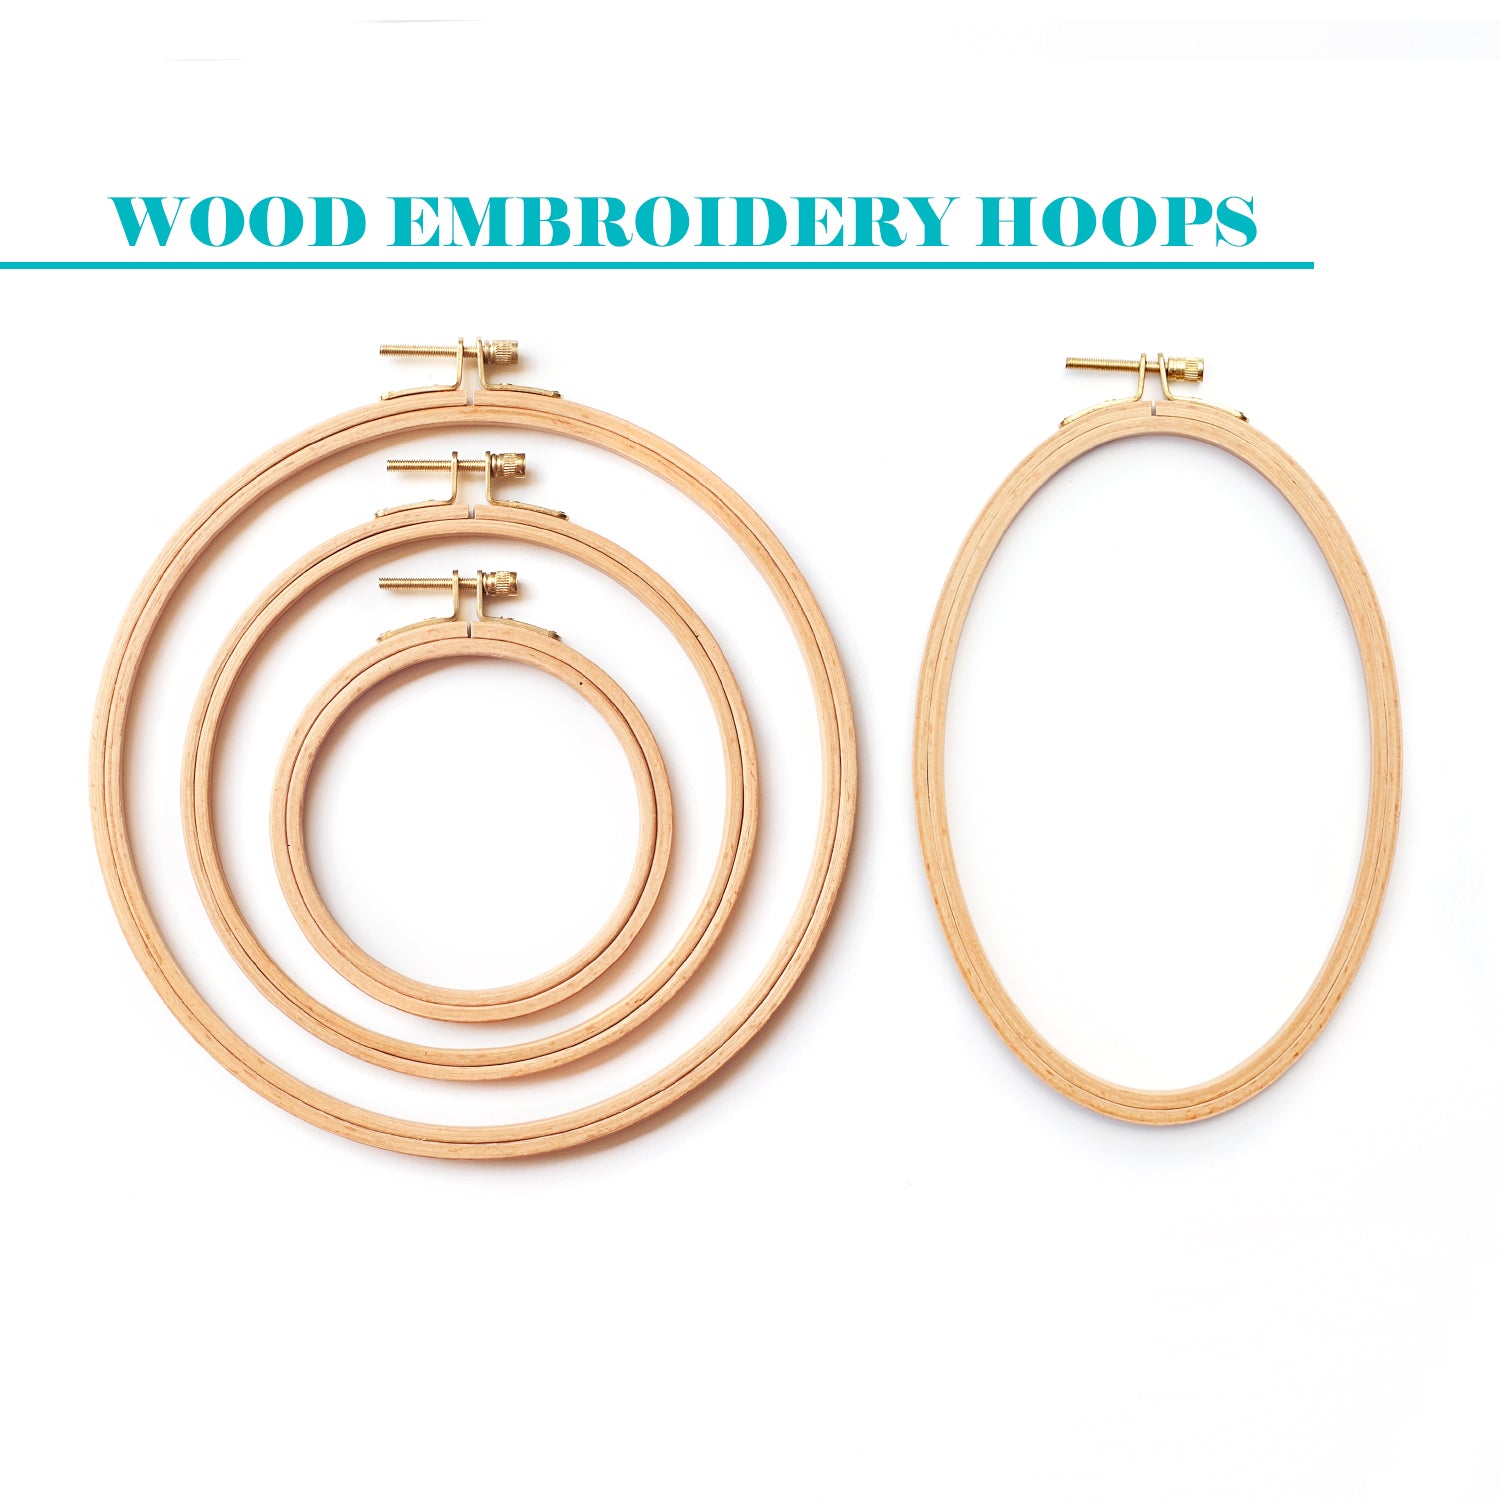 Embroidery Hoops, Hoops, Beechwood Embroidery Hoops - Wooden Embroidery  Hoops, Hand Embroidery Hoop with gold hardware — Handstitched Studio